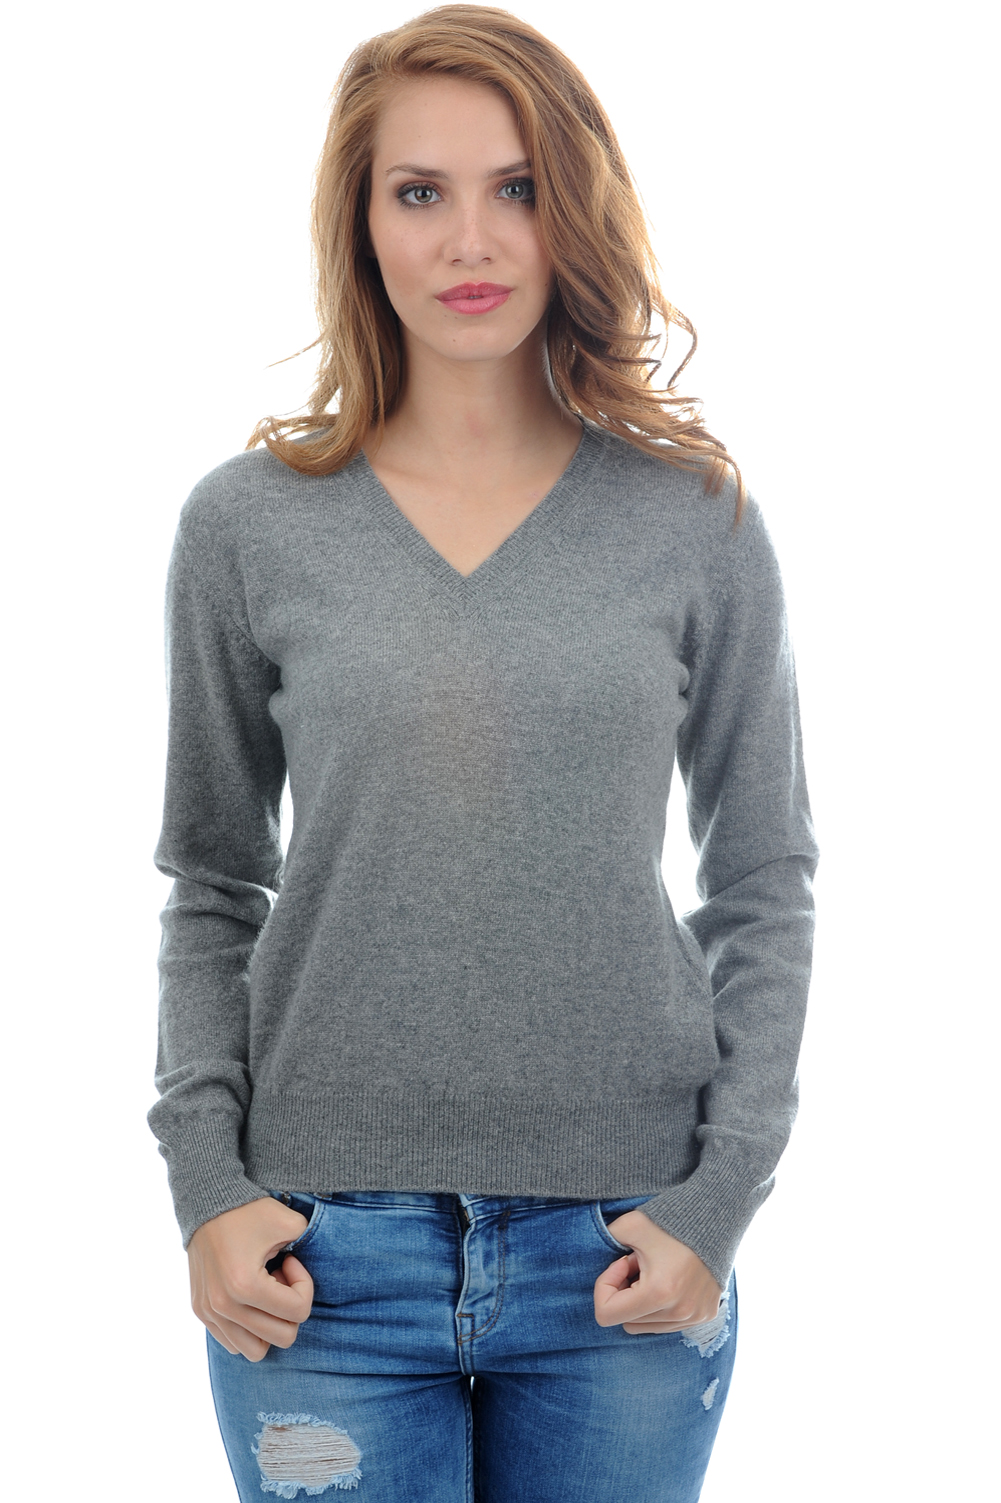 Cachemire pull femme faustine gris chine 2xl